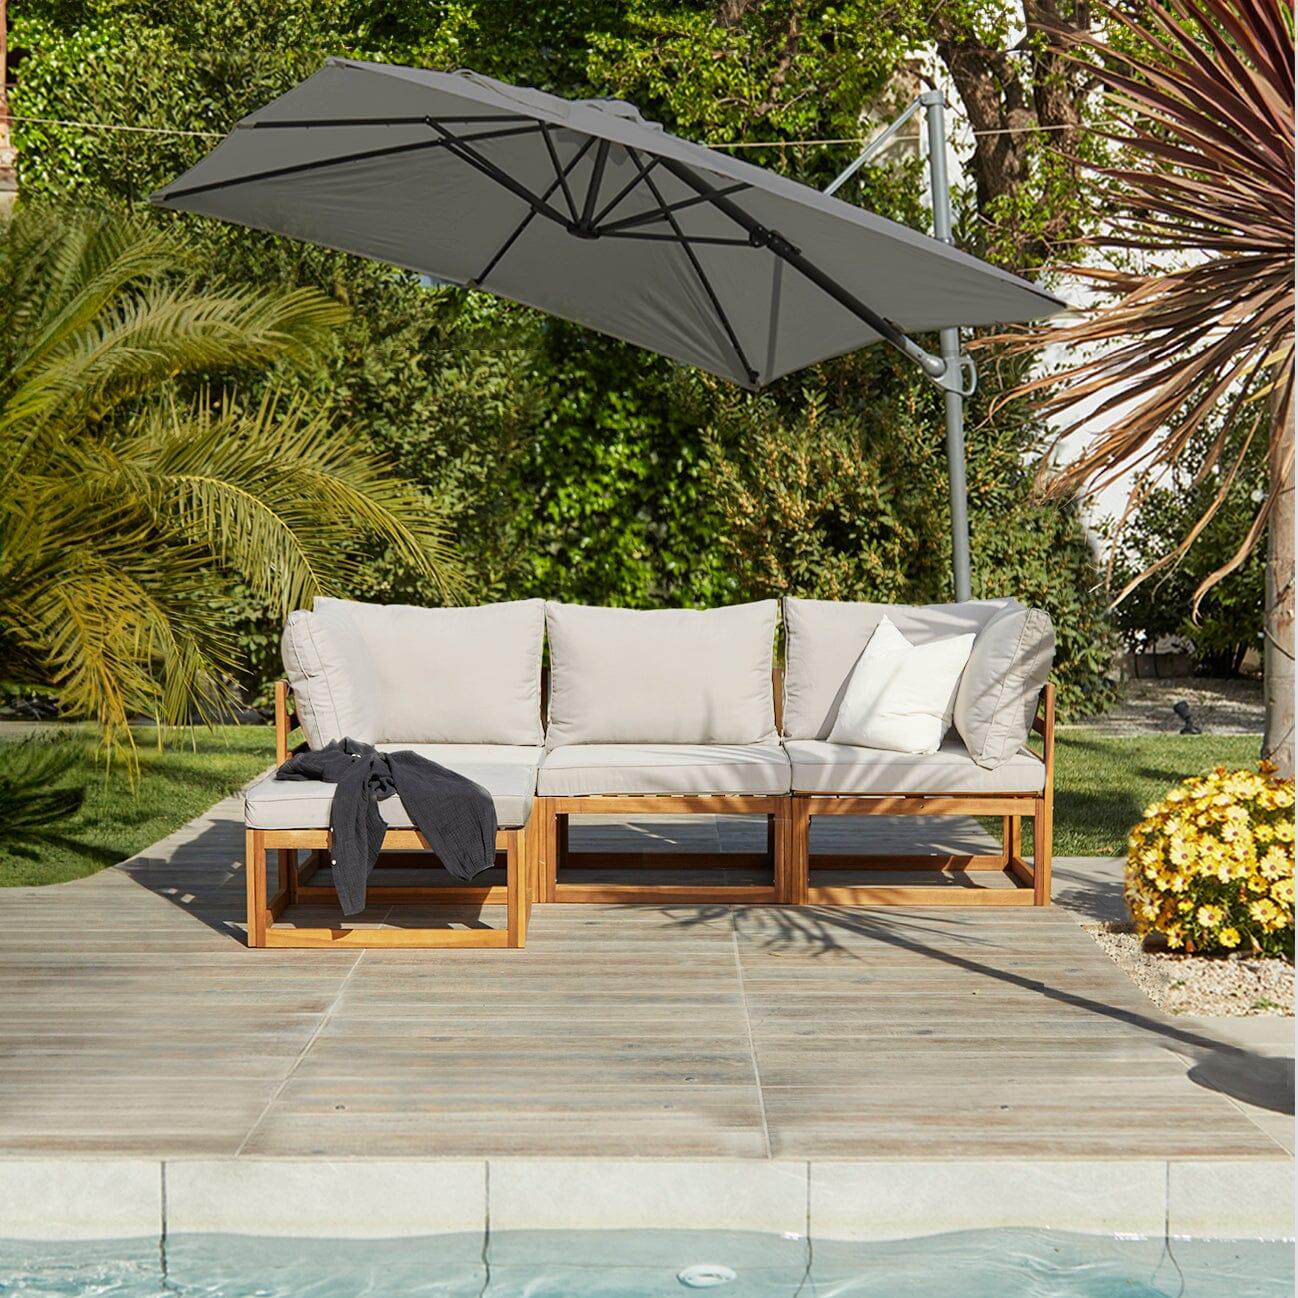 Rowan Natural 3 Seater Garden Sofa and Footstool with Grey Lean Over Parasol - Laura James